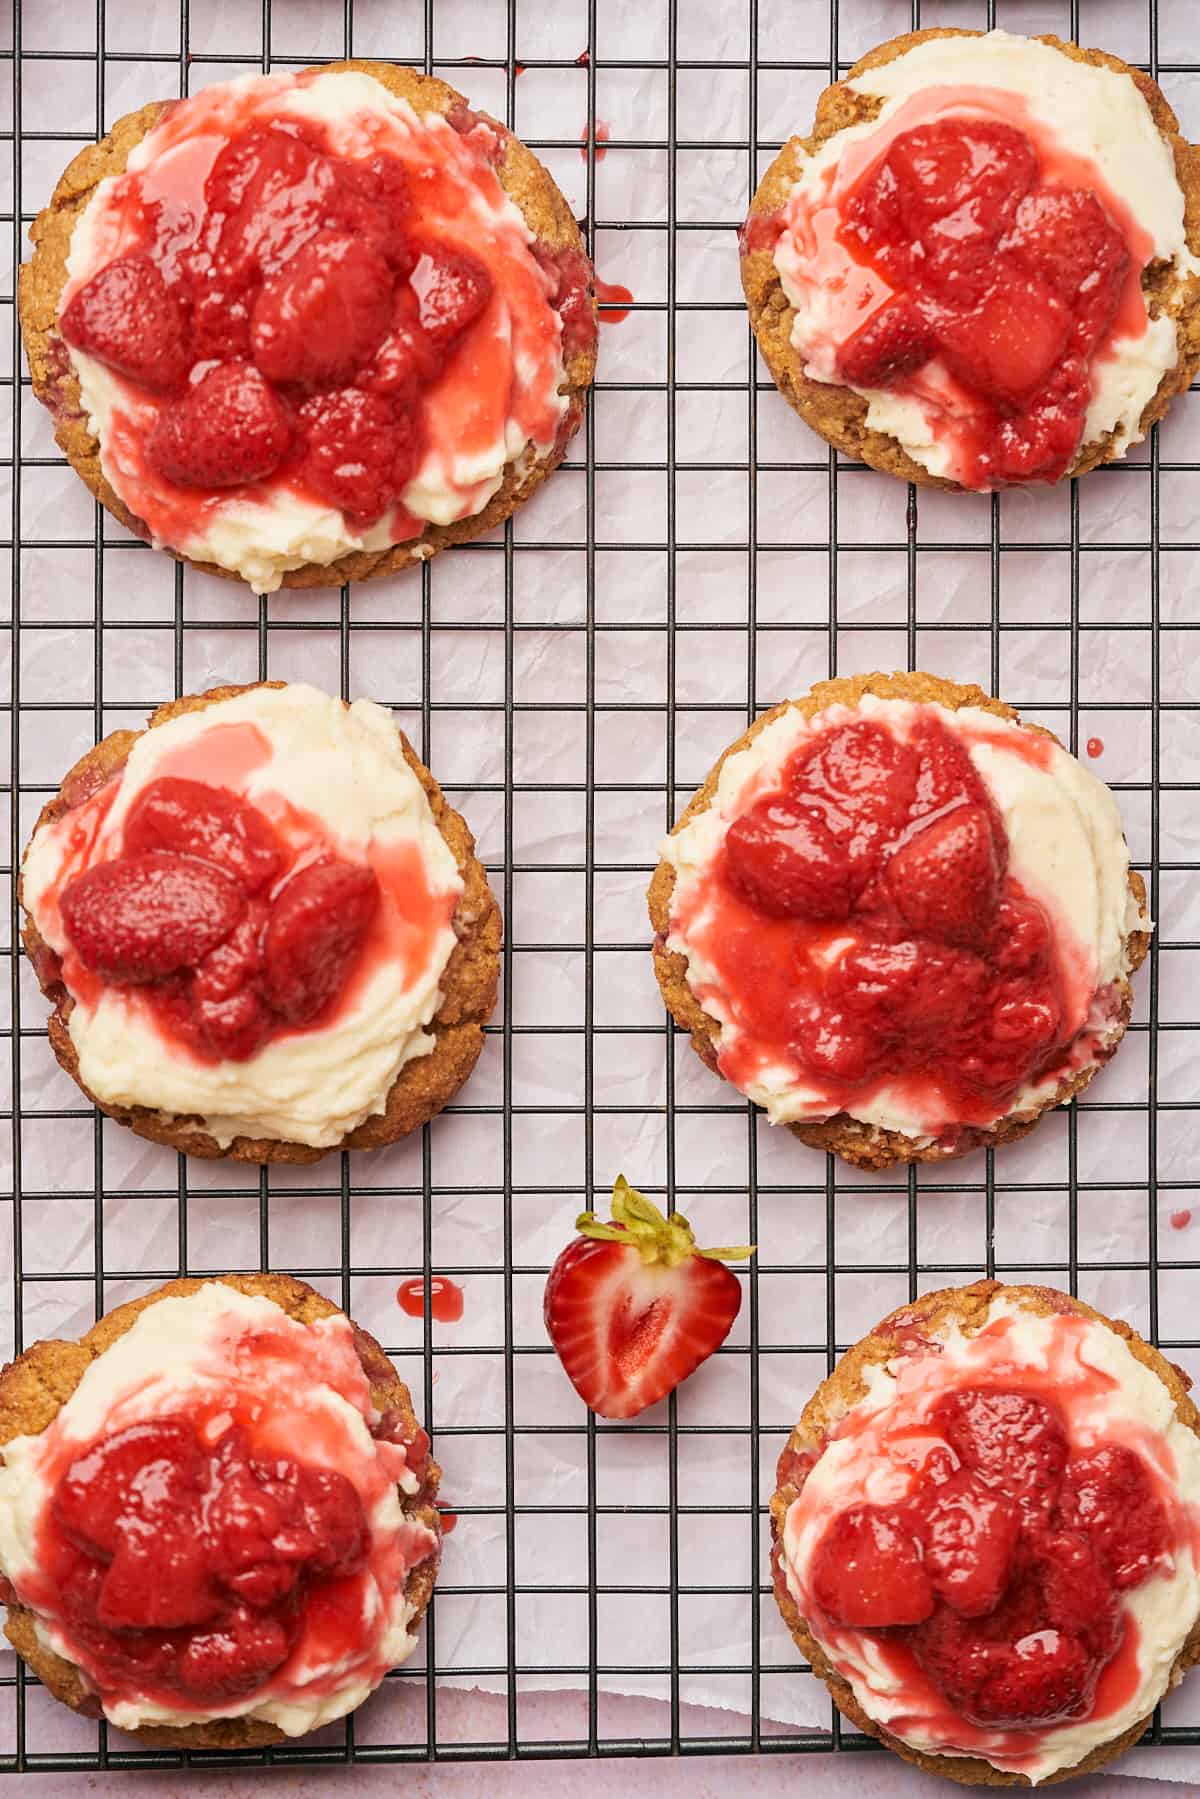 stunning shots of a row of 6 strawberry cheesecake cookies, with frosting spread over top, and fresh strawberry sauce. 